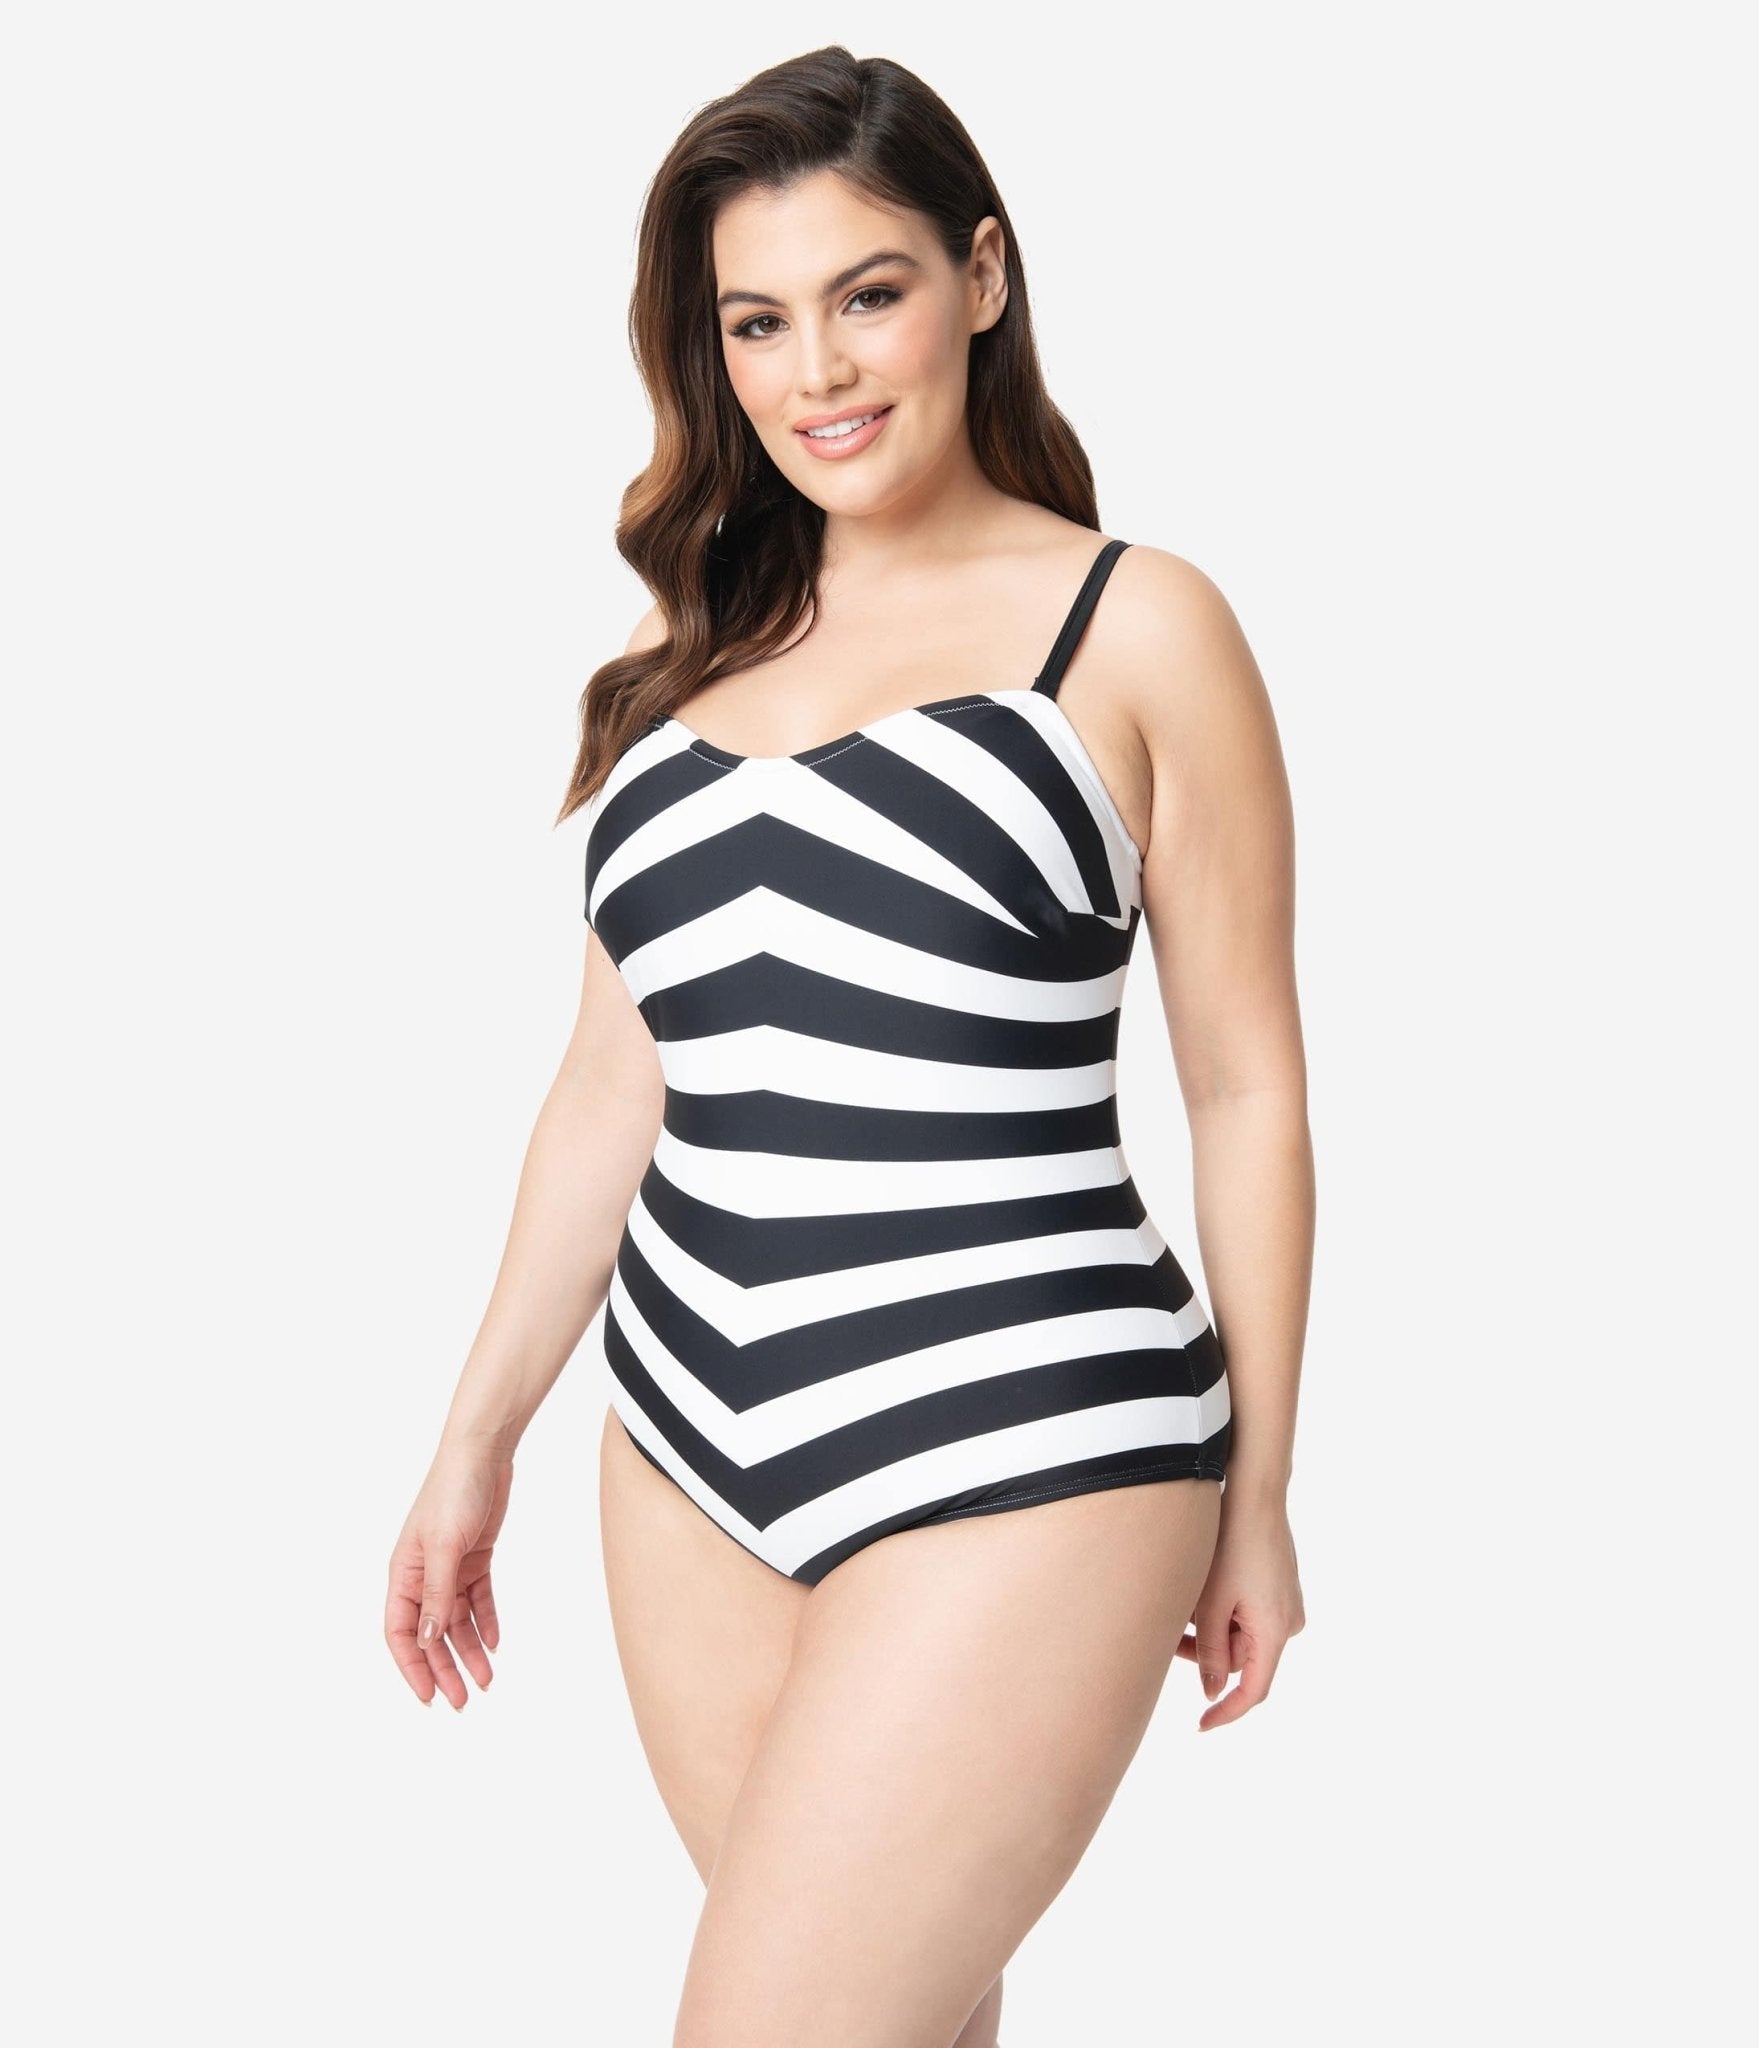 Swim Suit , Cute One-piece Swimsuit, Black White Retro Bathing Suit, Plus  Size Swimwear Cheeky Swimsuits for Women, Modest Checkered Pattern 